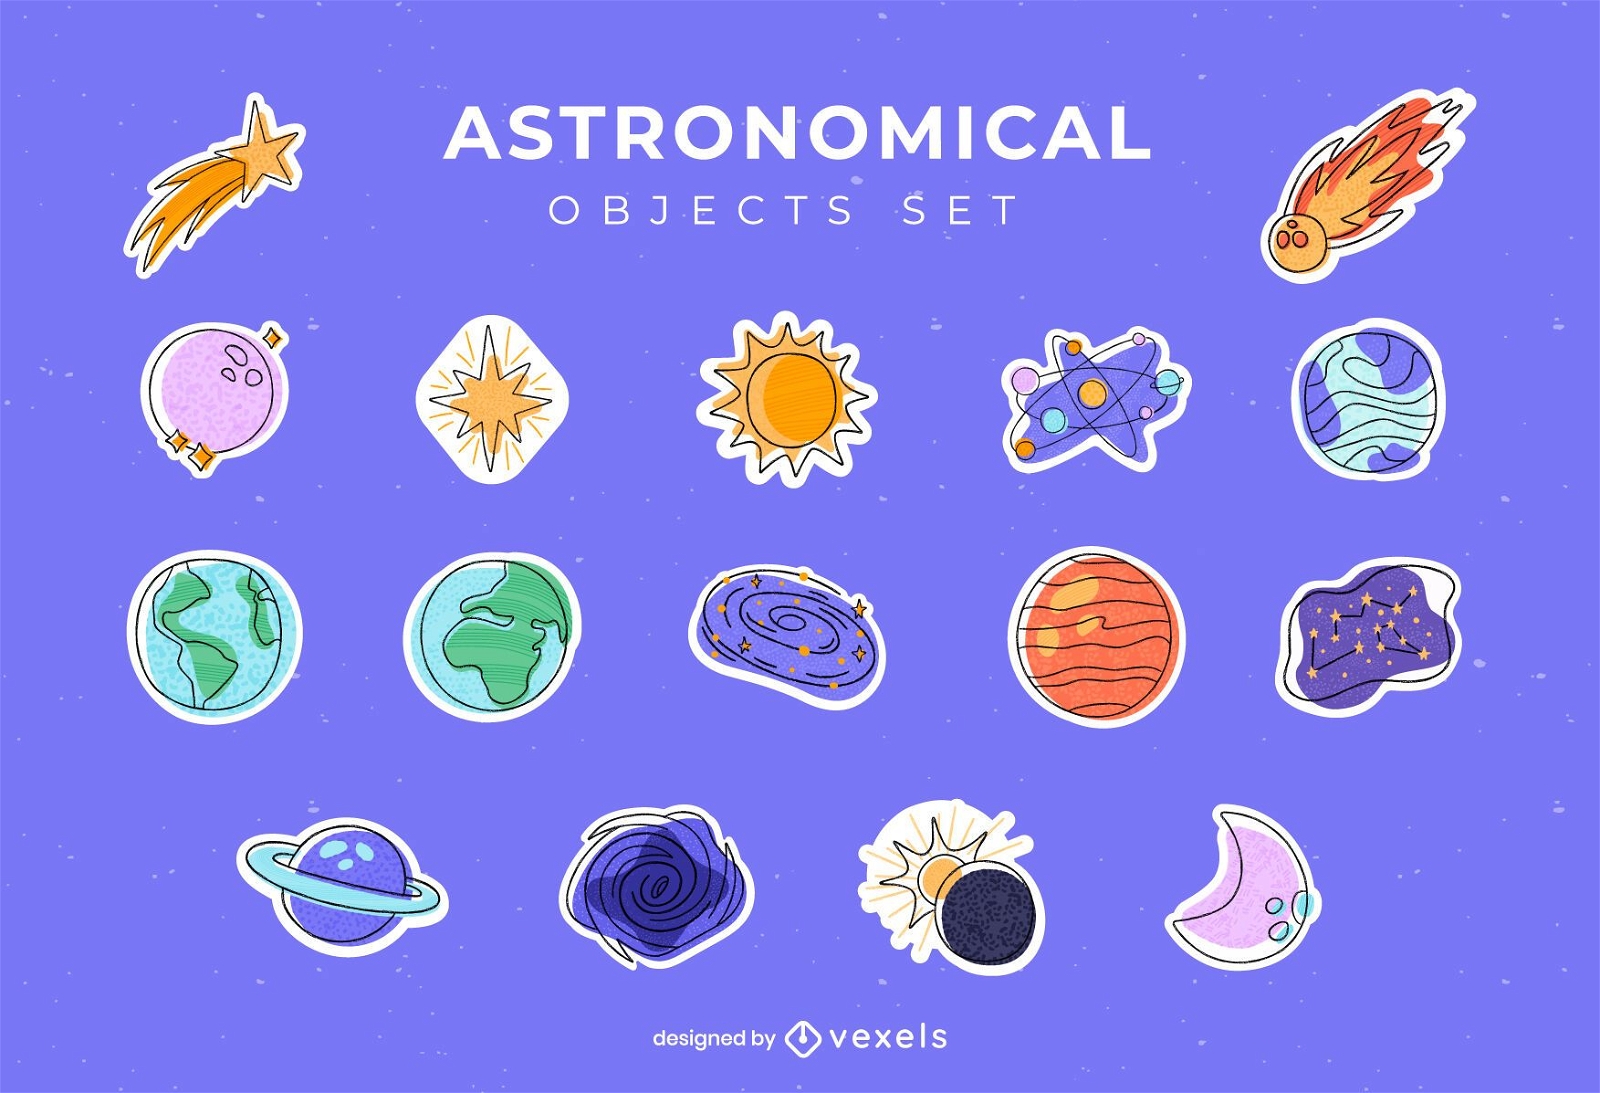 Astronomical objects sticker set